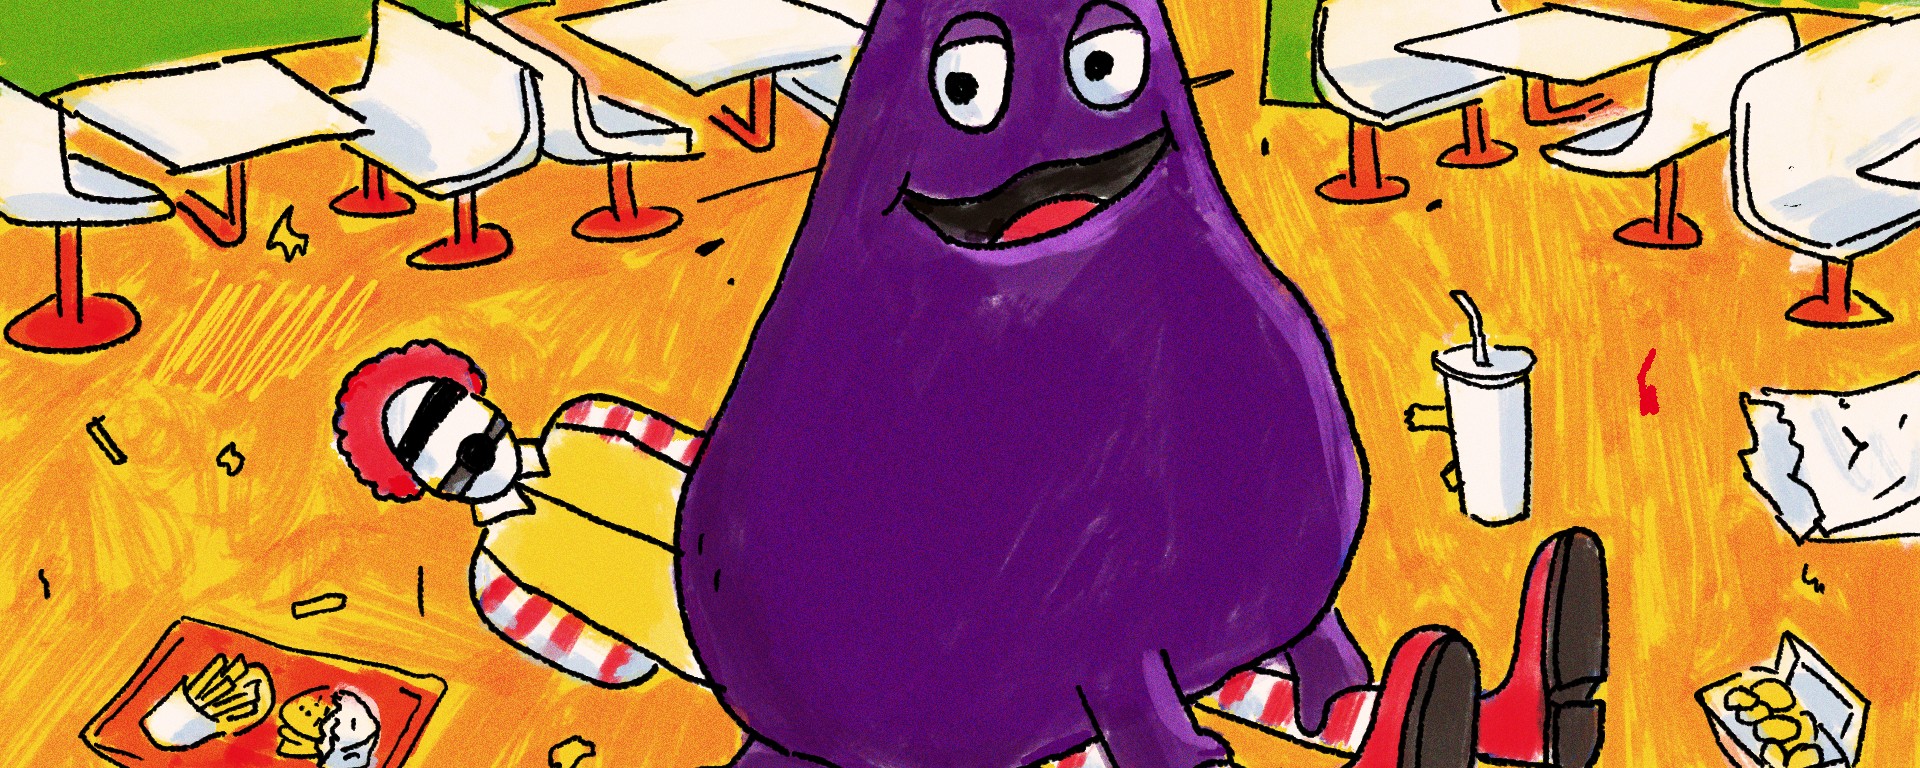 Does Grimace Fuck? An Investigation